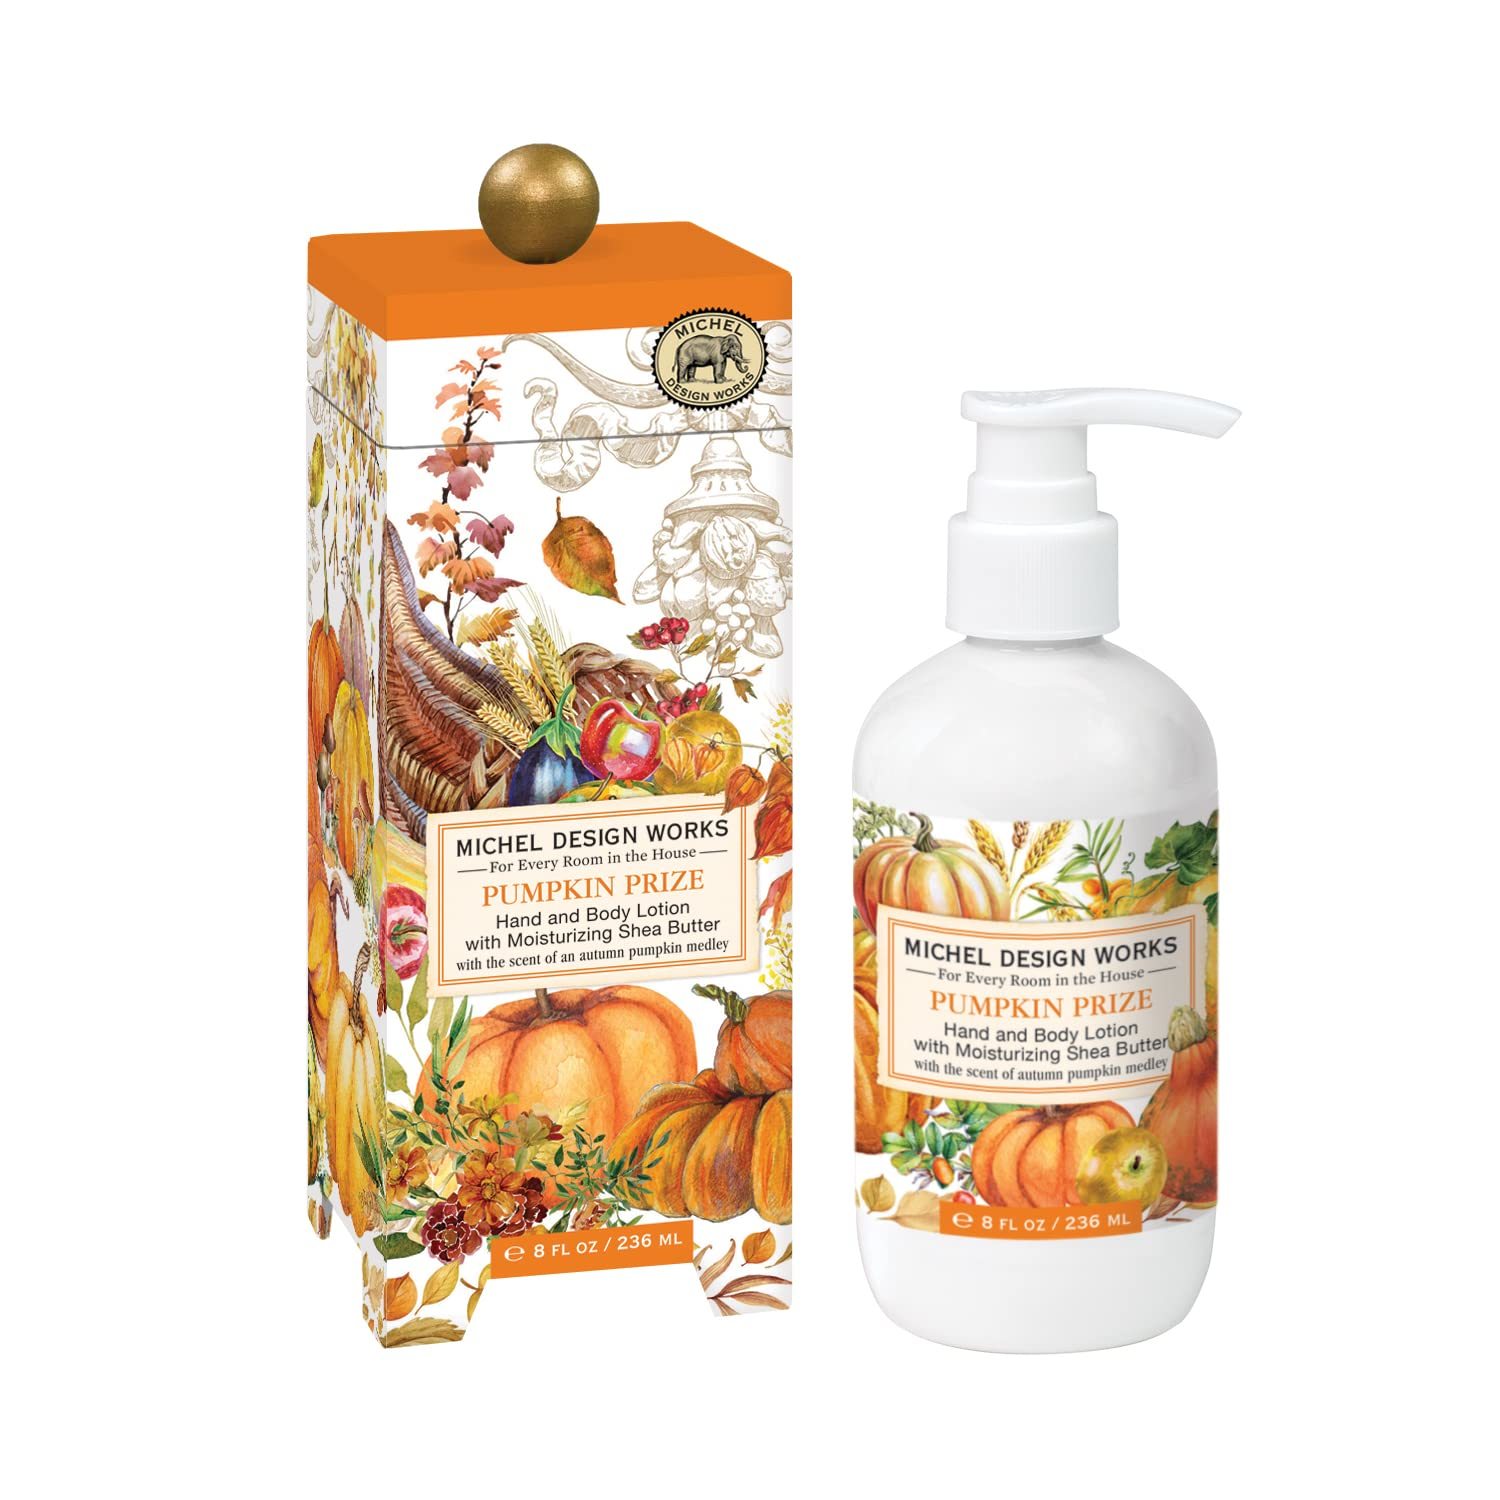 Michel Design Works Hand and Body Lotion, Pumpkin Prize - $28.99